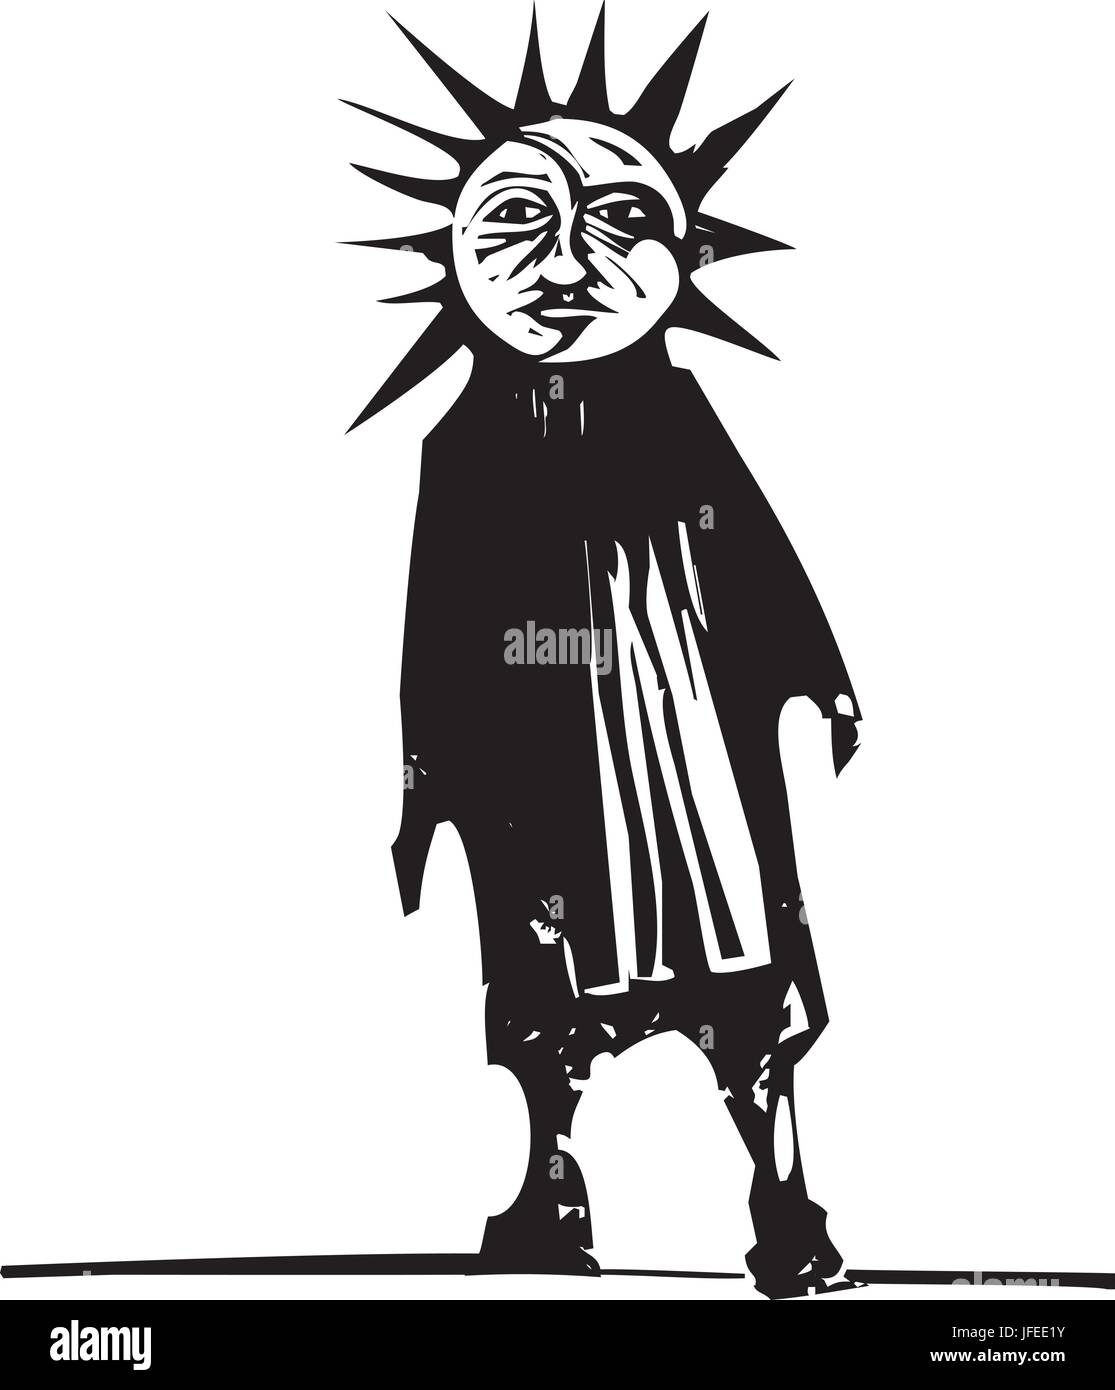 Woodcut style image of a sun and moon face on human figure Stock Vector